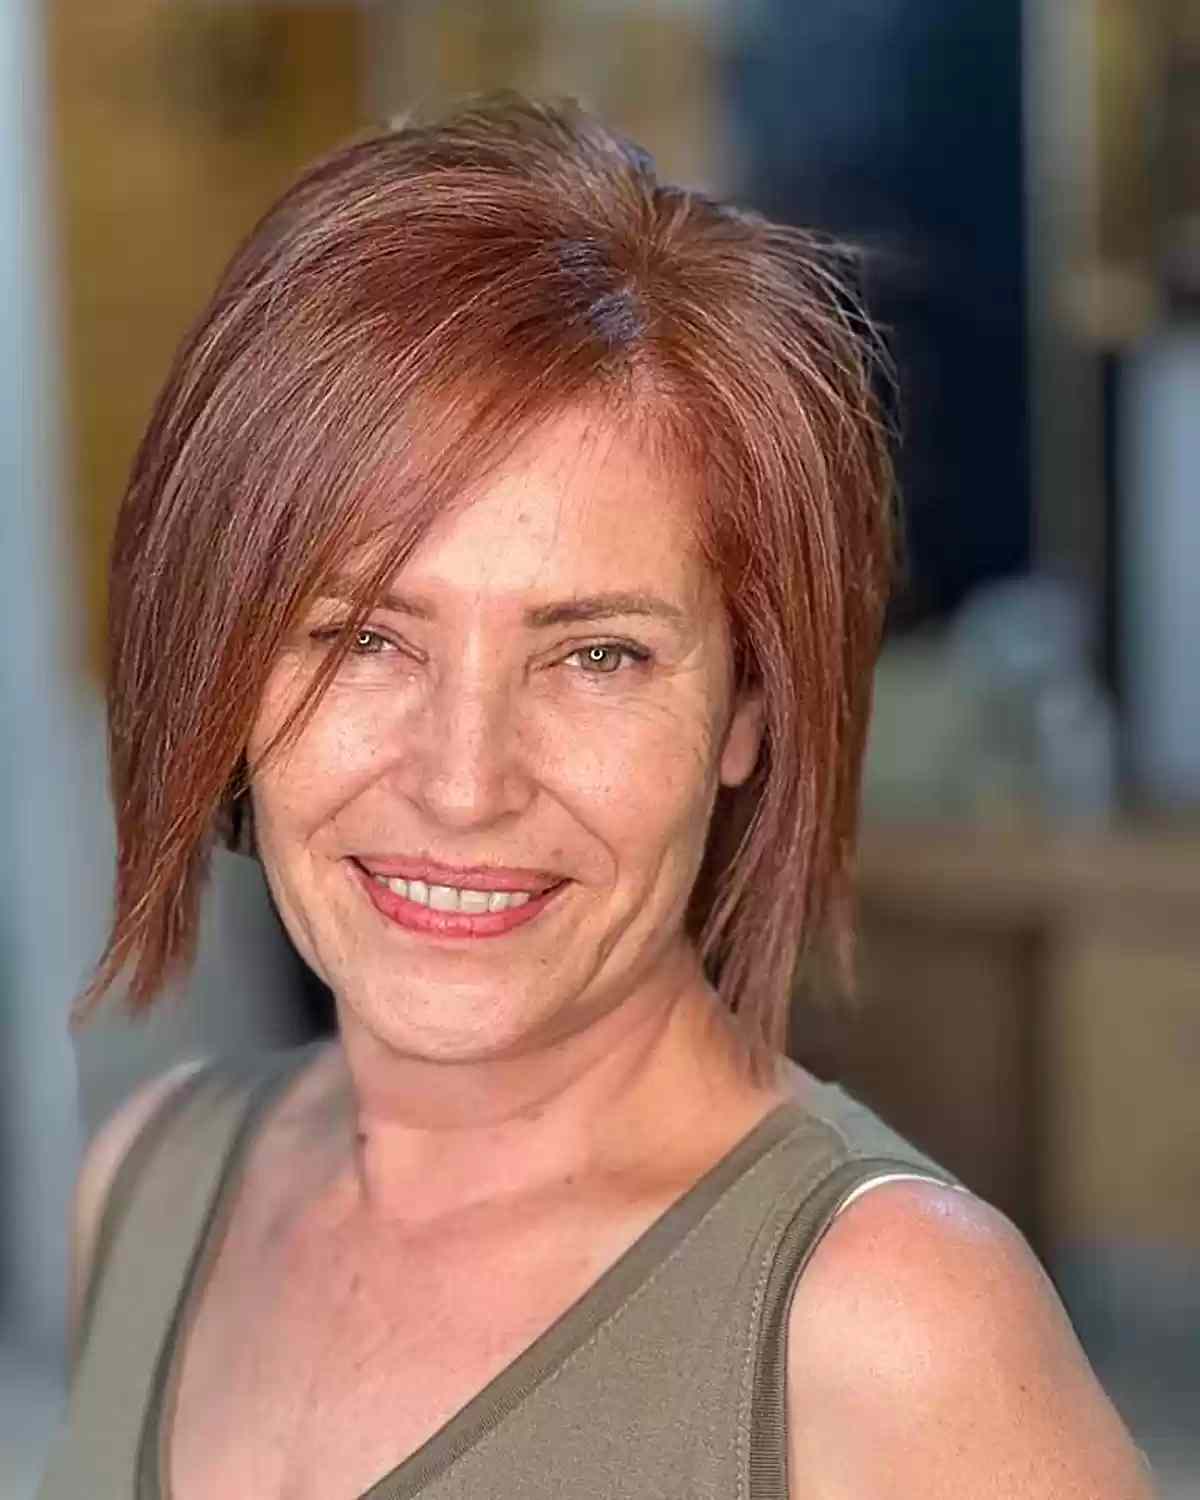 Muted Warm Red Short Hair for Fall and Ladies Aged 50